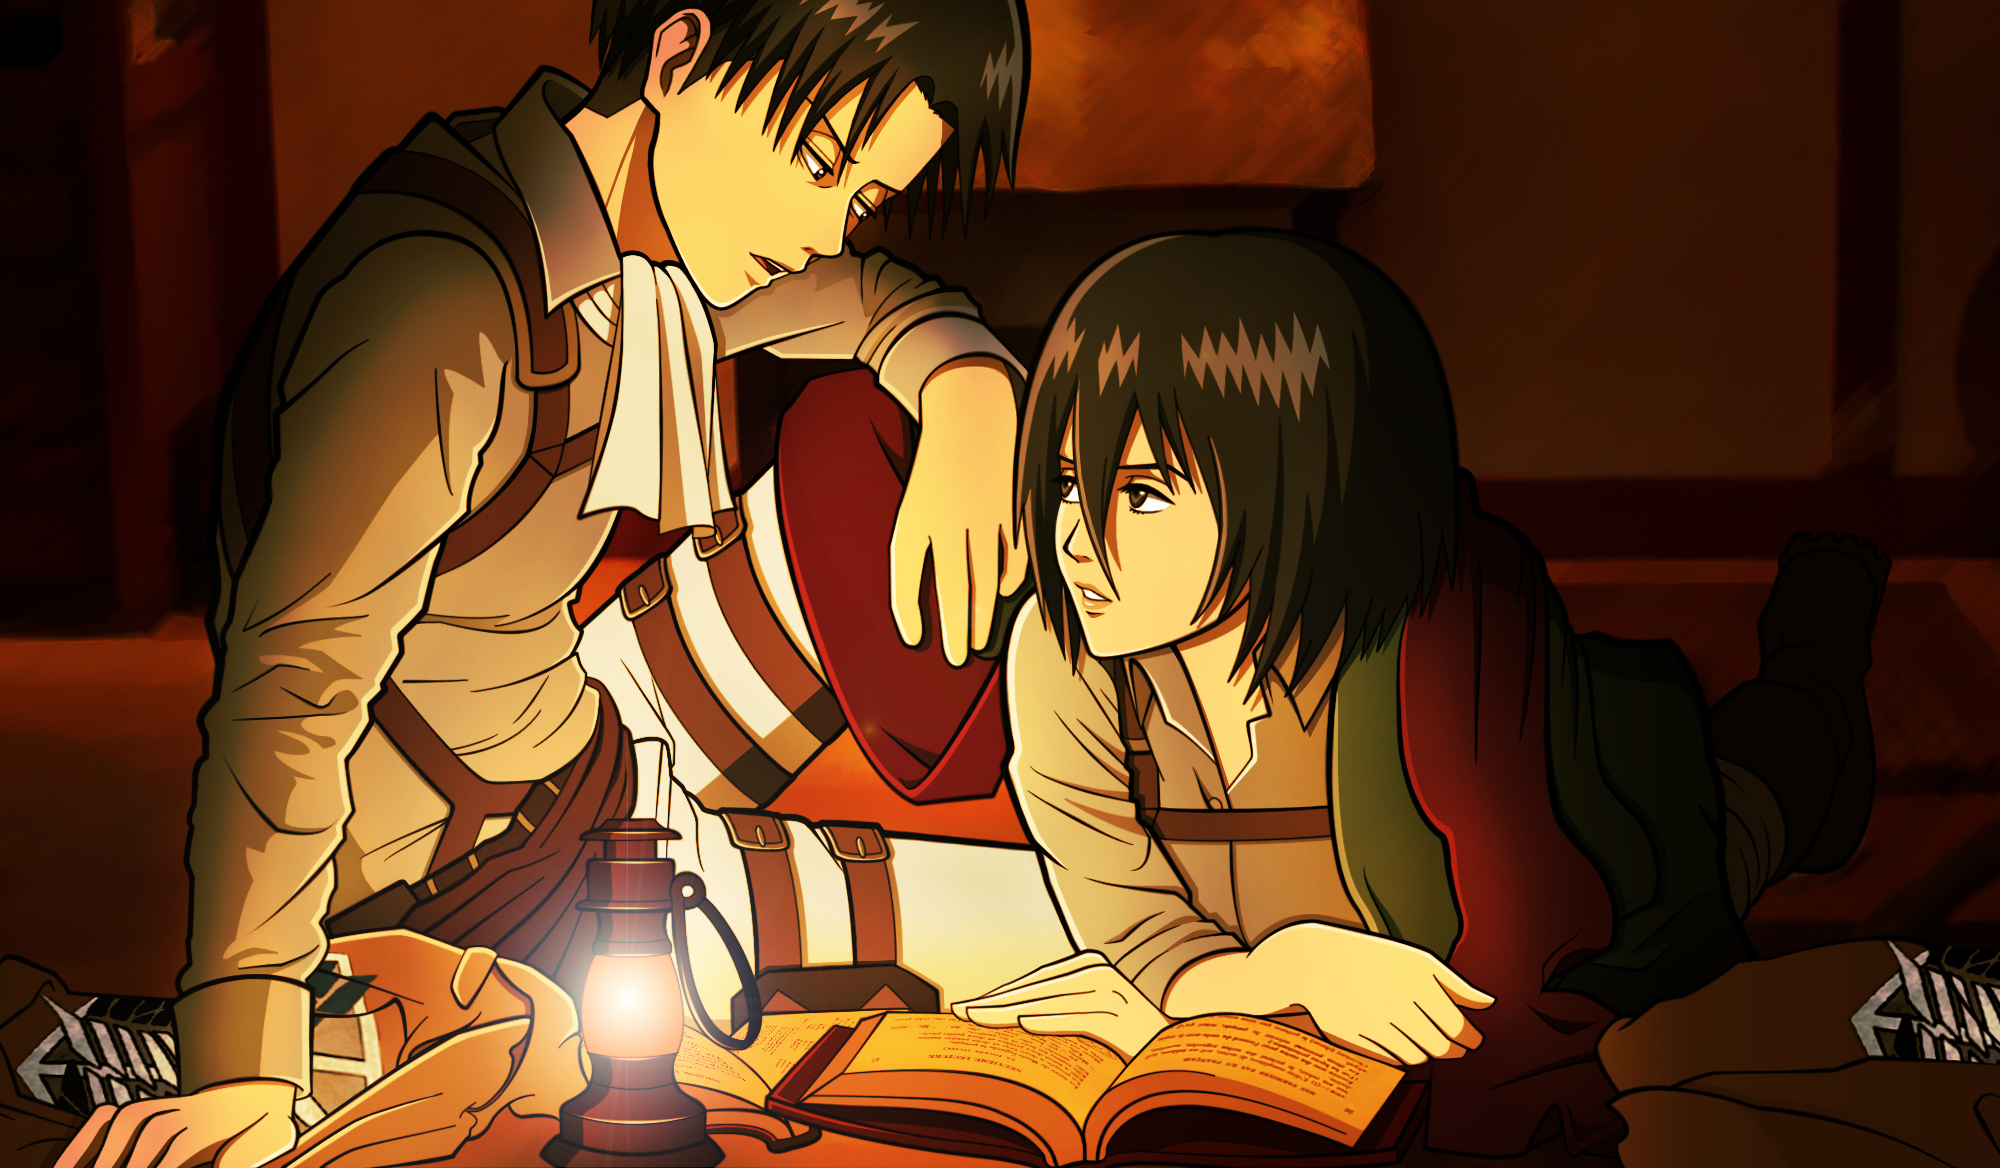 Levi and mikasa fanfic ♥ Brothers love each other.. no matte